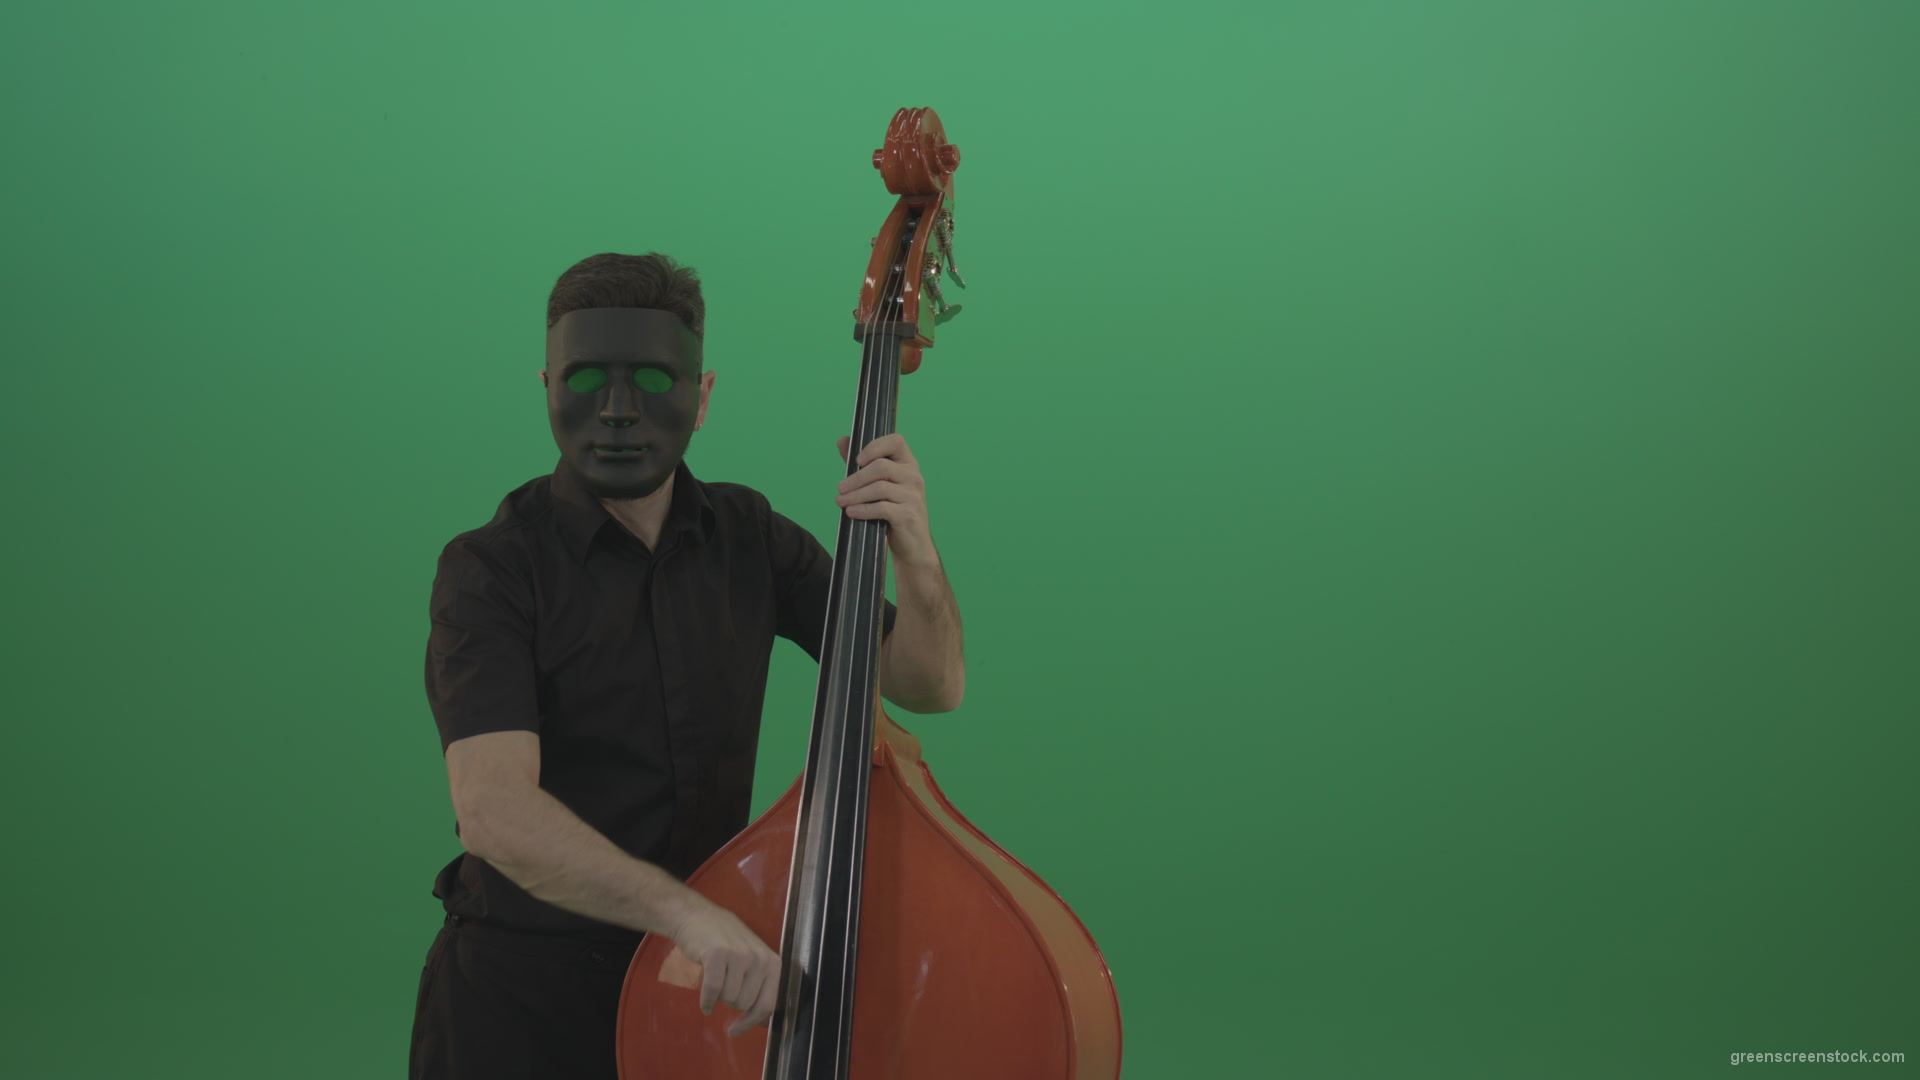 Man-in-black-mask-with-green-eyes-play-music-on-double-bass-instrument-isolated-on-green-screen_004 Green Screen Stock